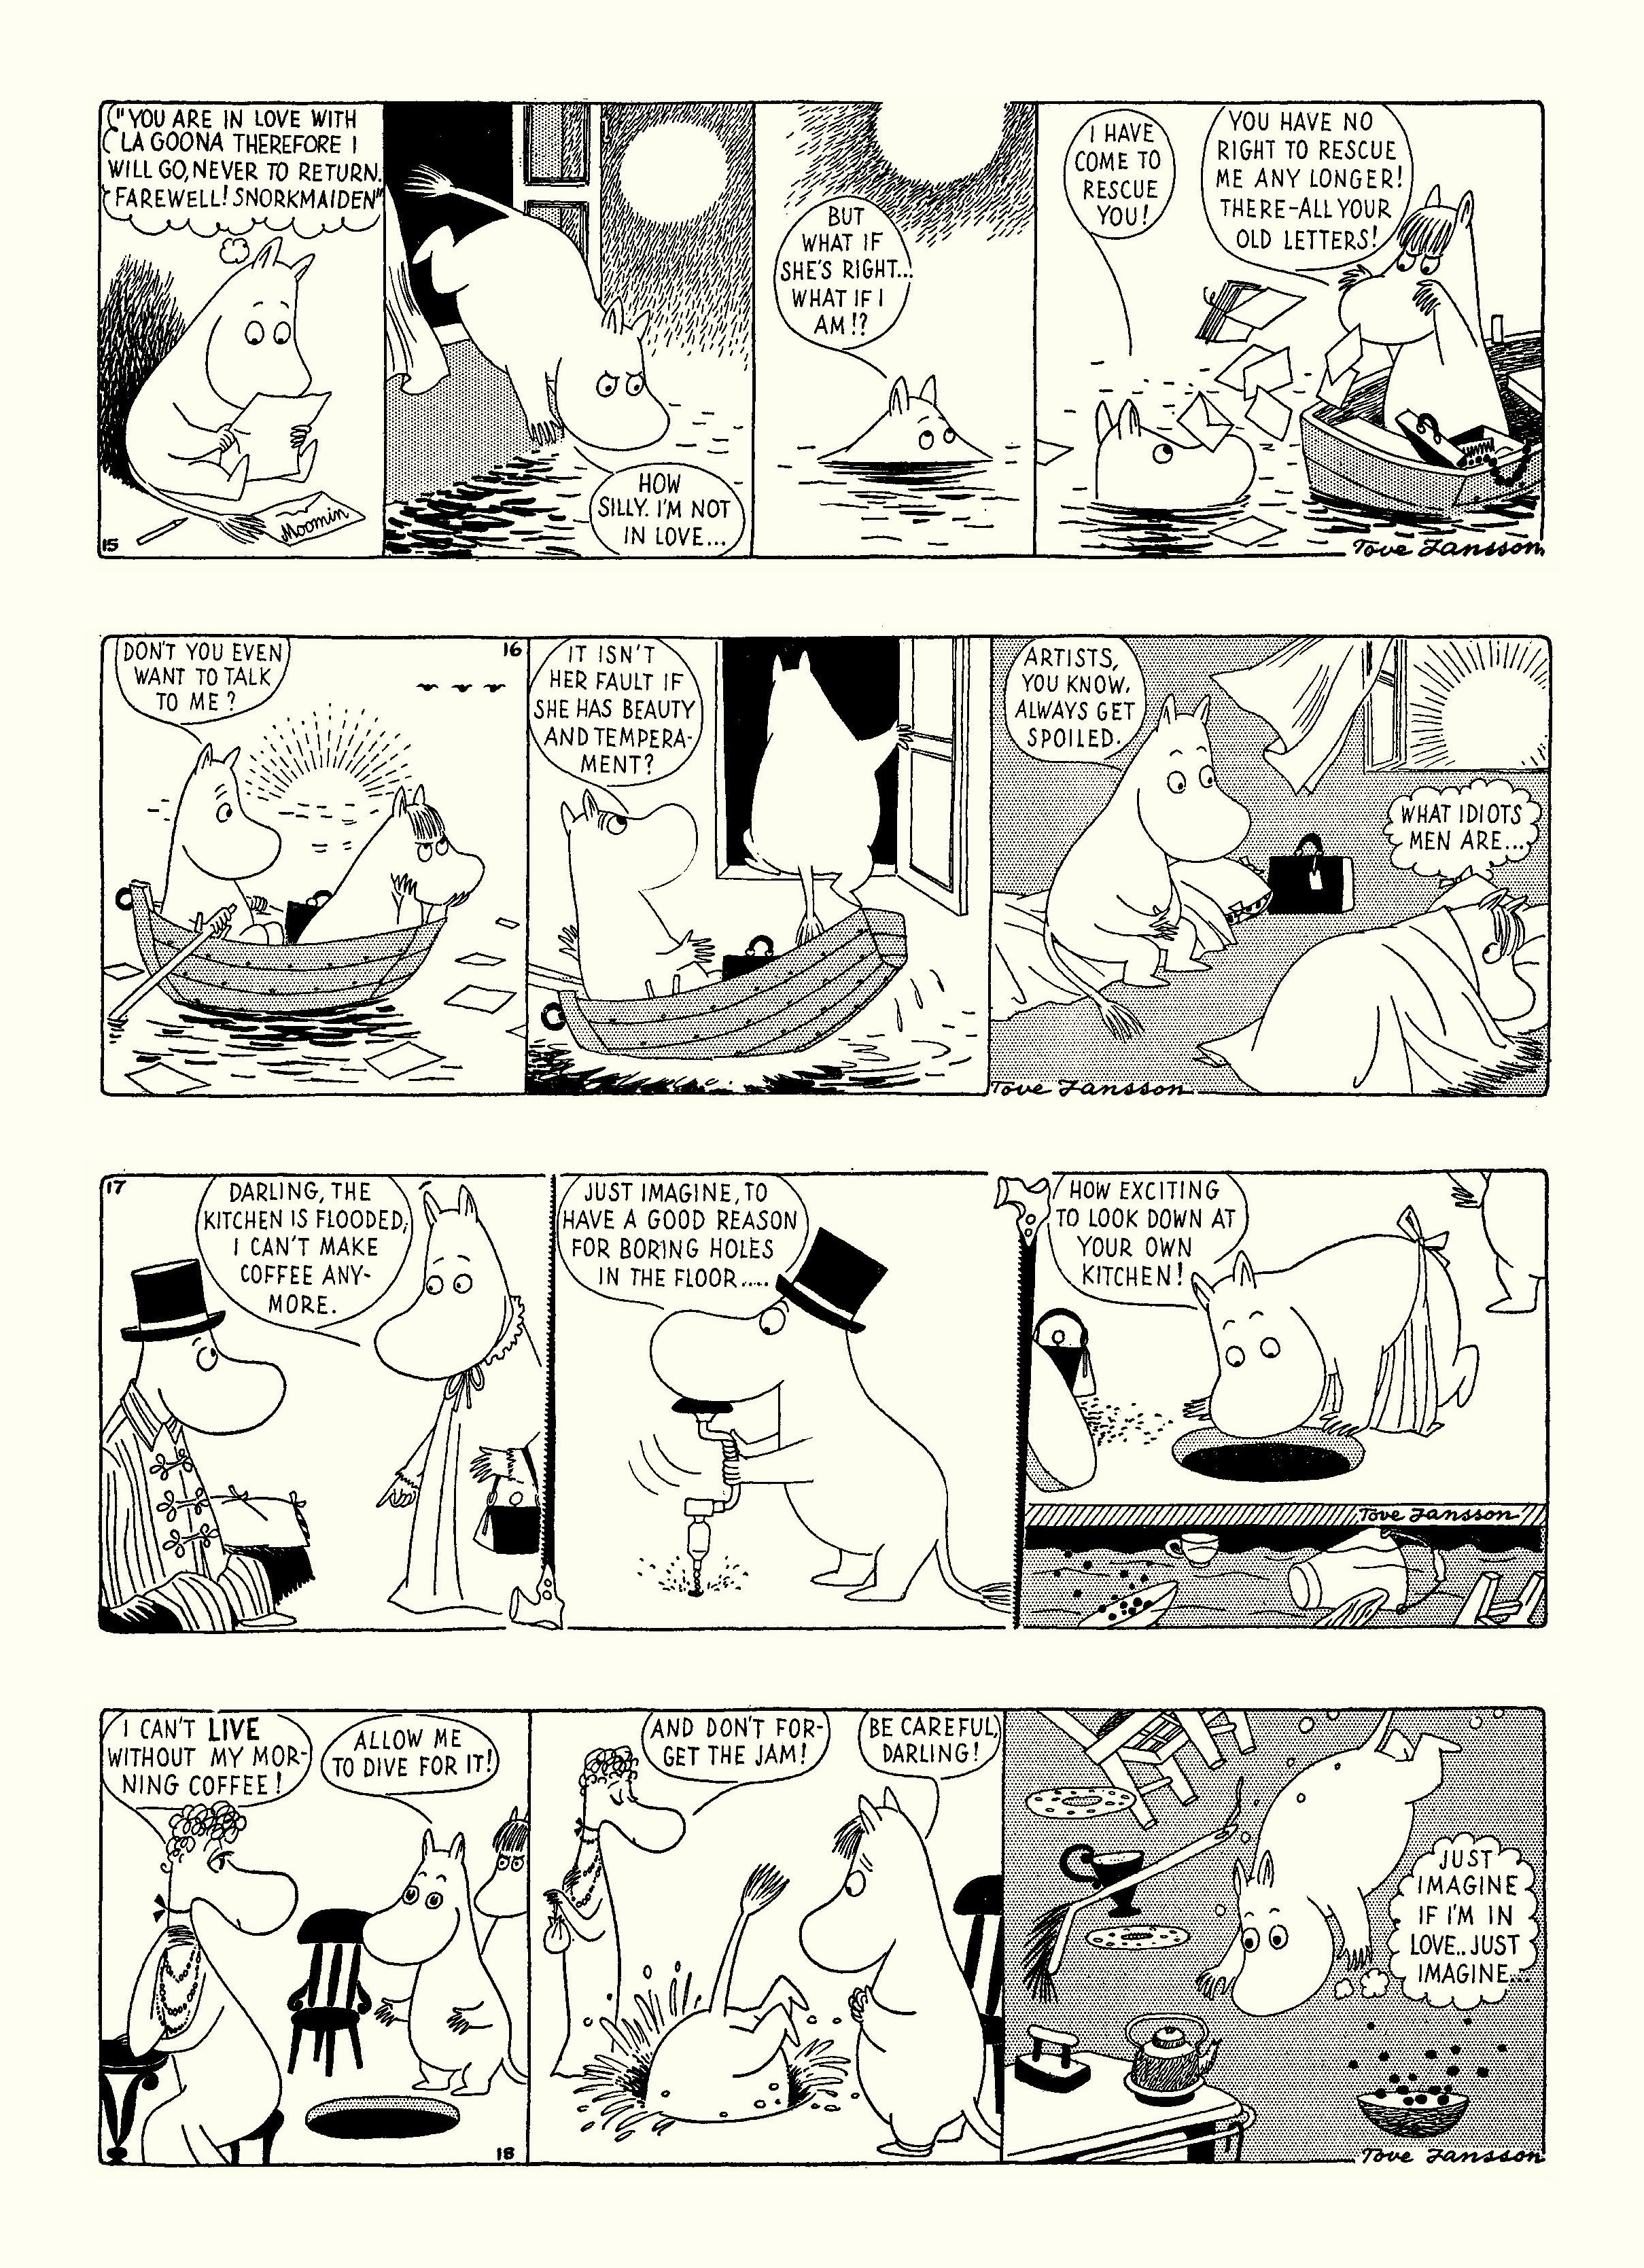 Read online Moomin: The Complete Tove Jansson Comic Strip comic -  Issue # TPB 3 - 10